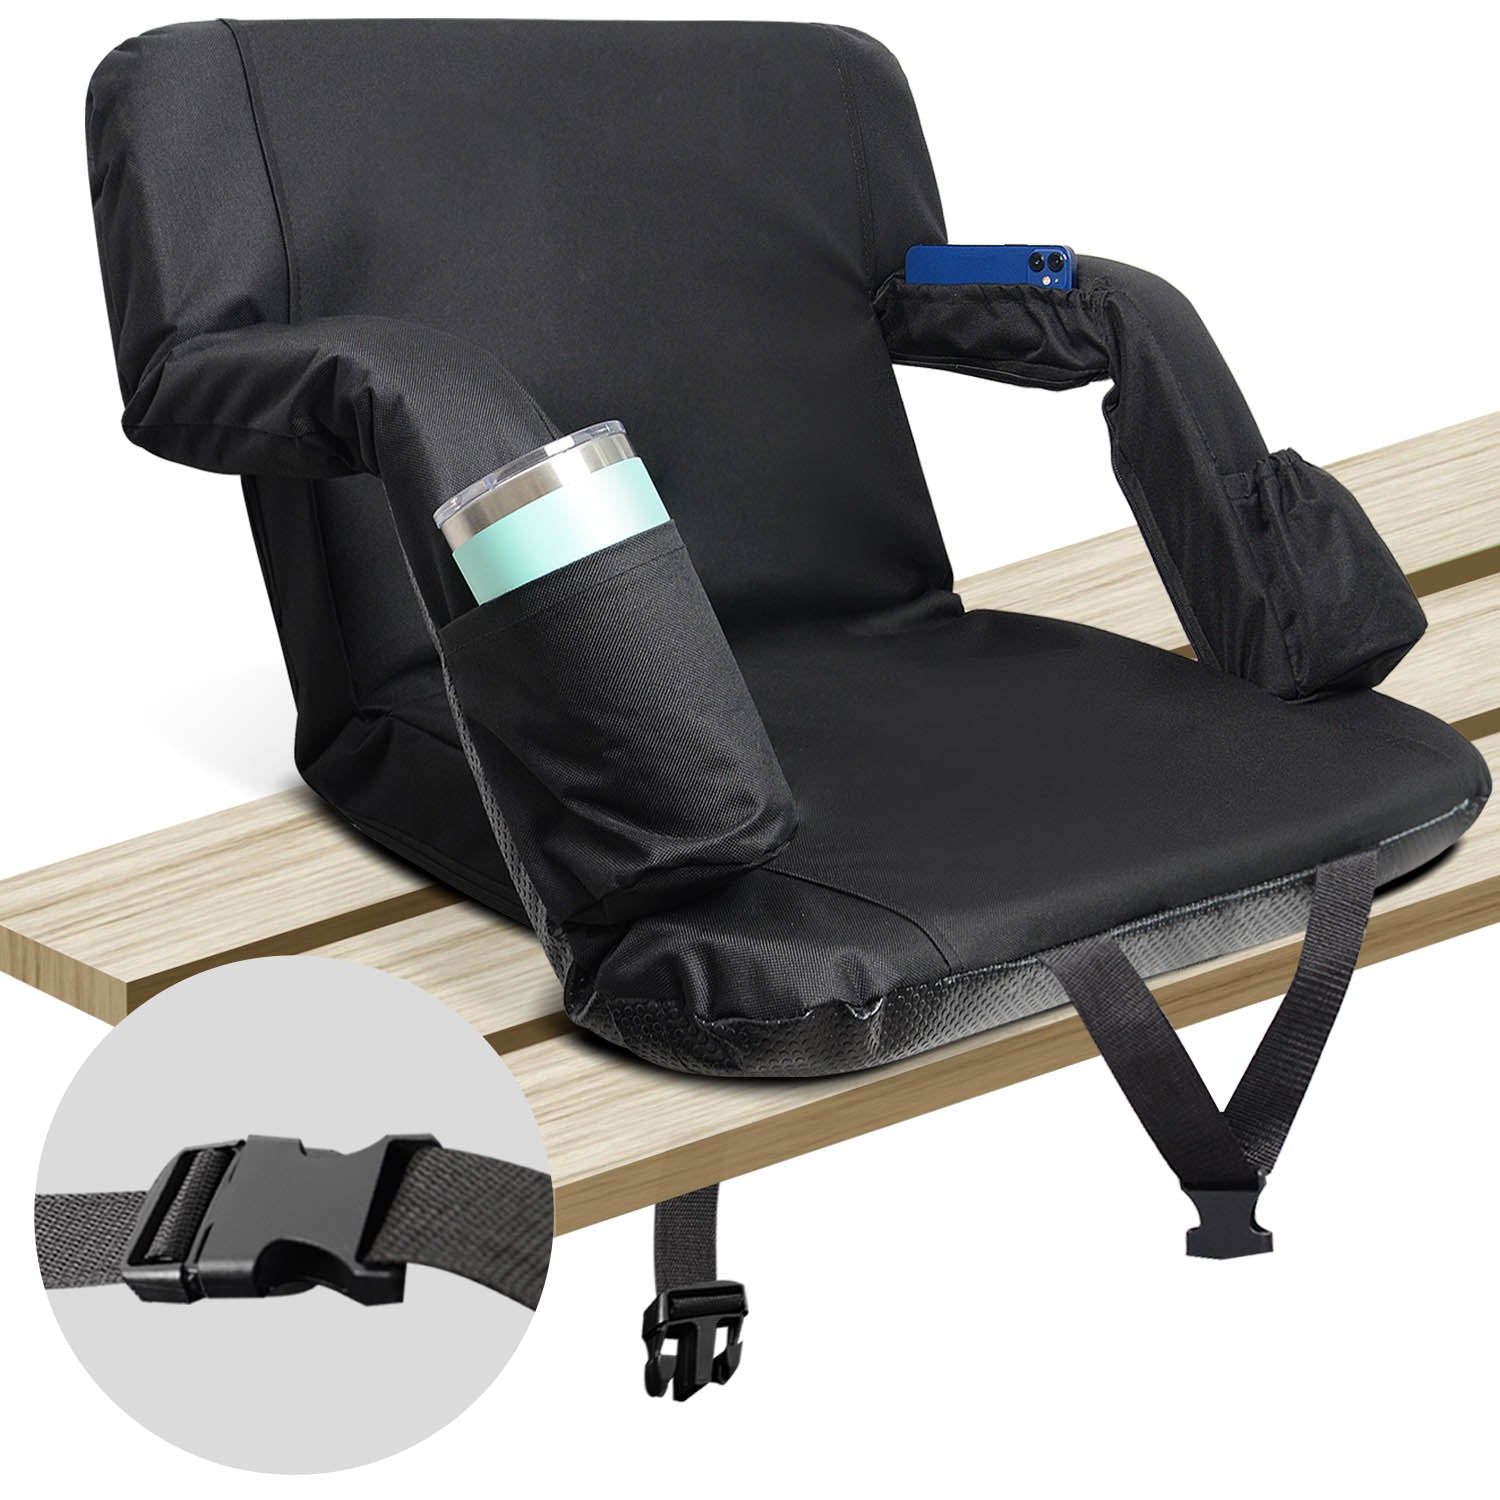 Mynt Wide Stadium Seat for Bleachers, Stadium Chair with Wide Back Sup –  HelloMynt